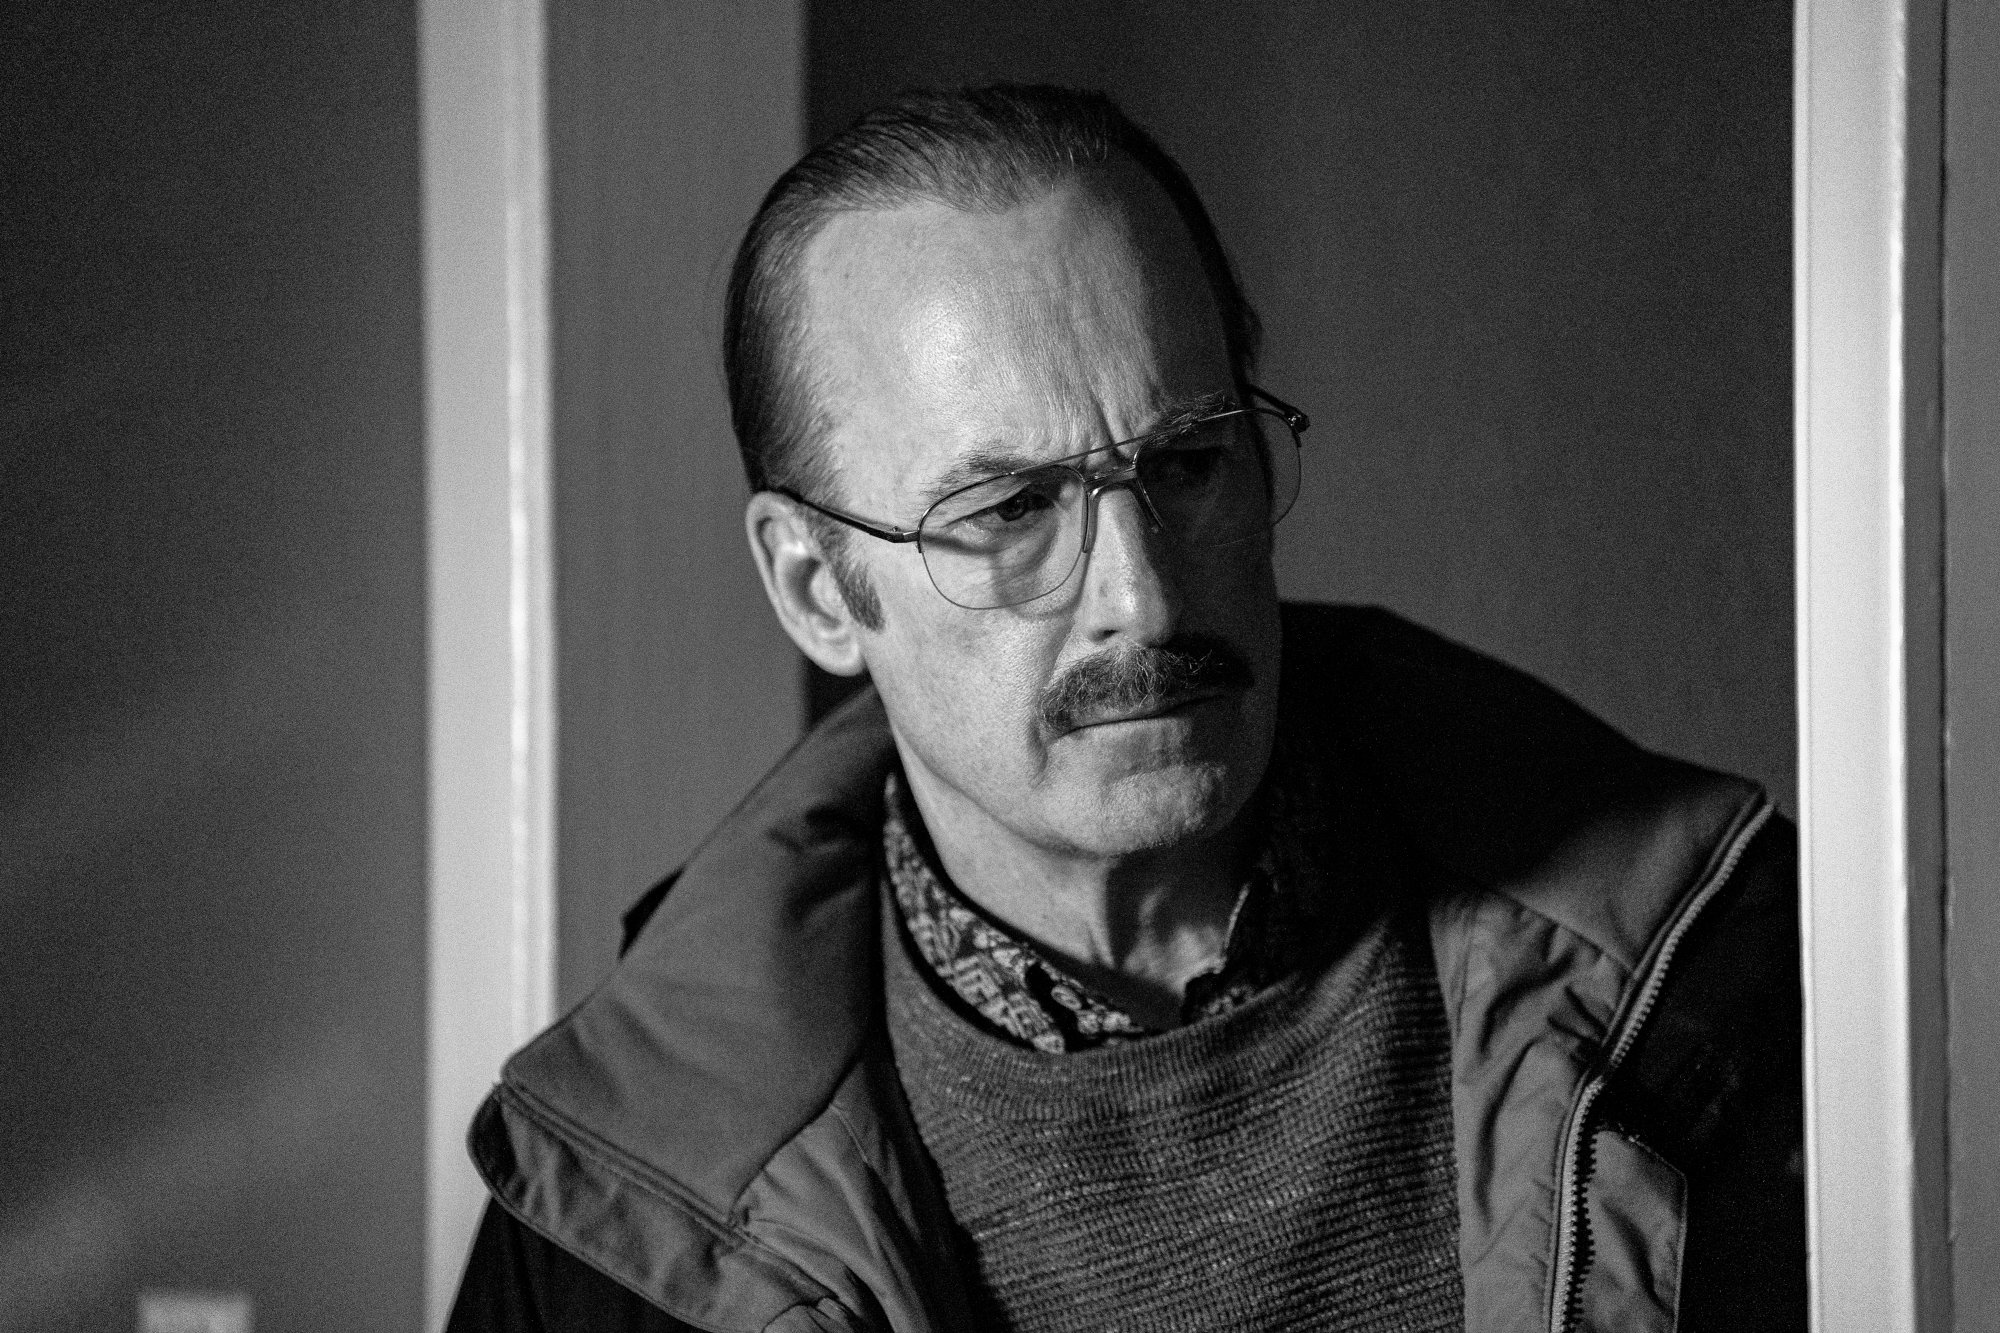 Bob Odenkirk as Gene Takovic in 'Better Call Saul' Season 6 Episode 12. The image is in black and white, and he's wearing glasses and a jacket.